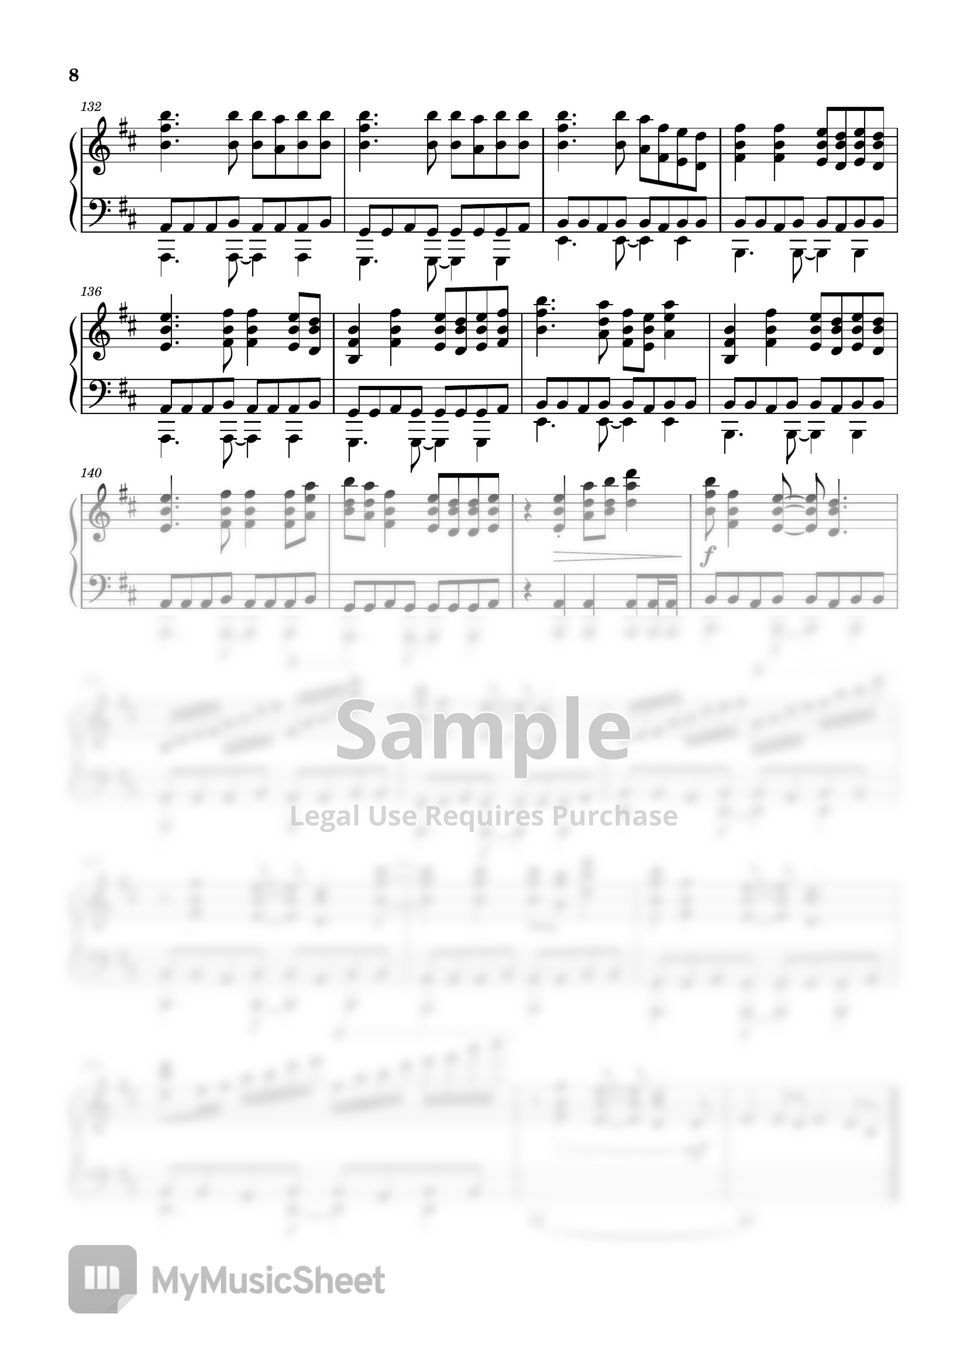 Preview] 1 (モブサイコ100 Mob Psycho 100 路人超能100 III OP) Sheet music for Piano  (Solo)